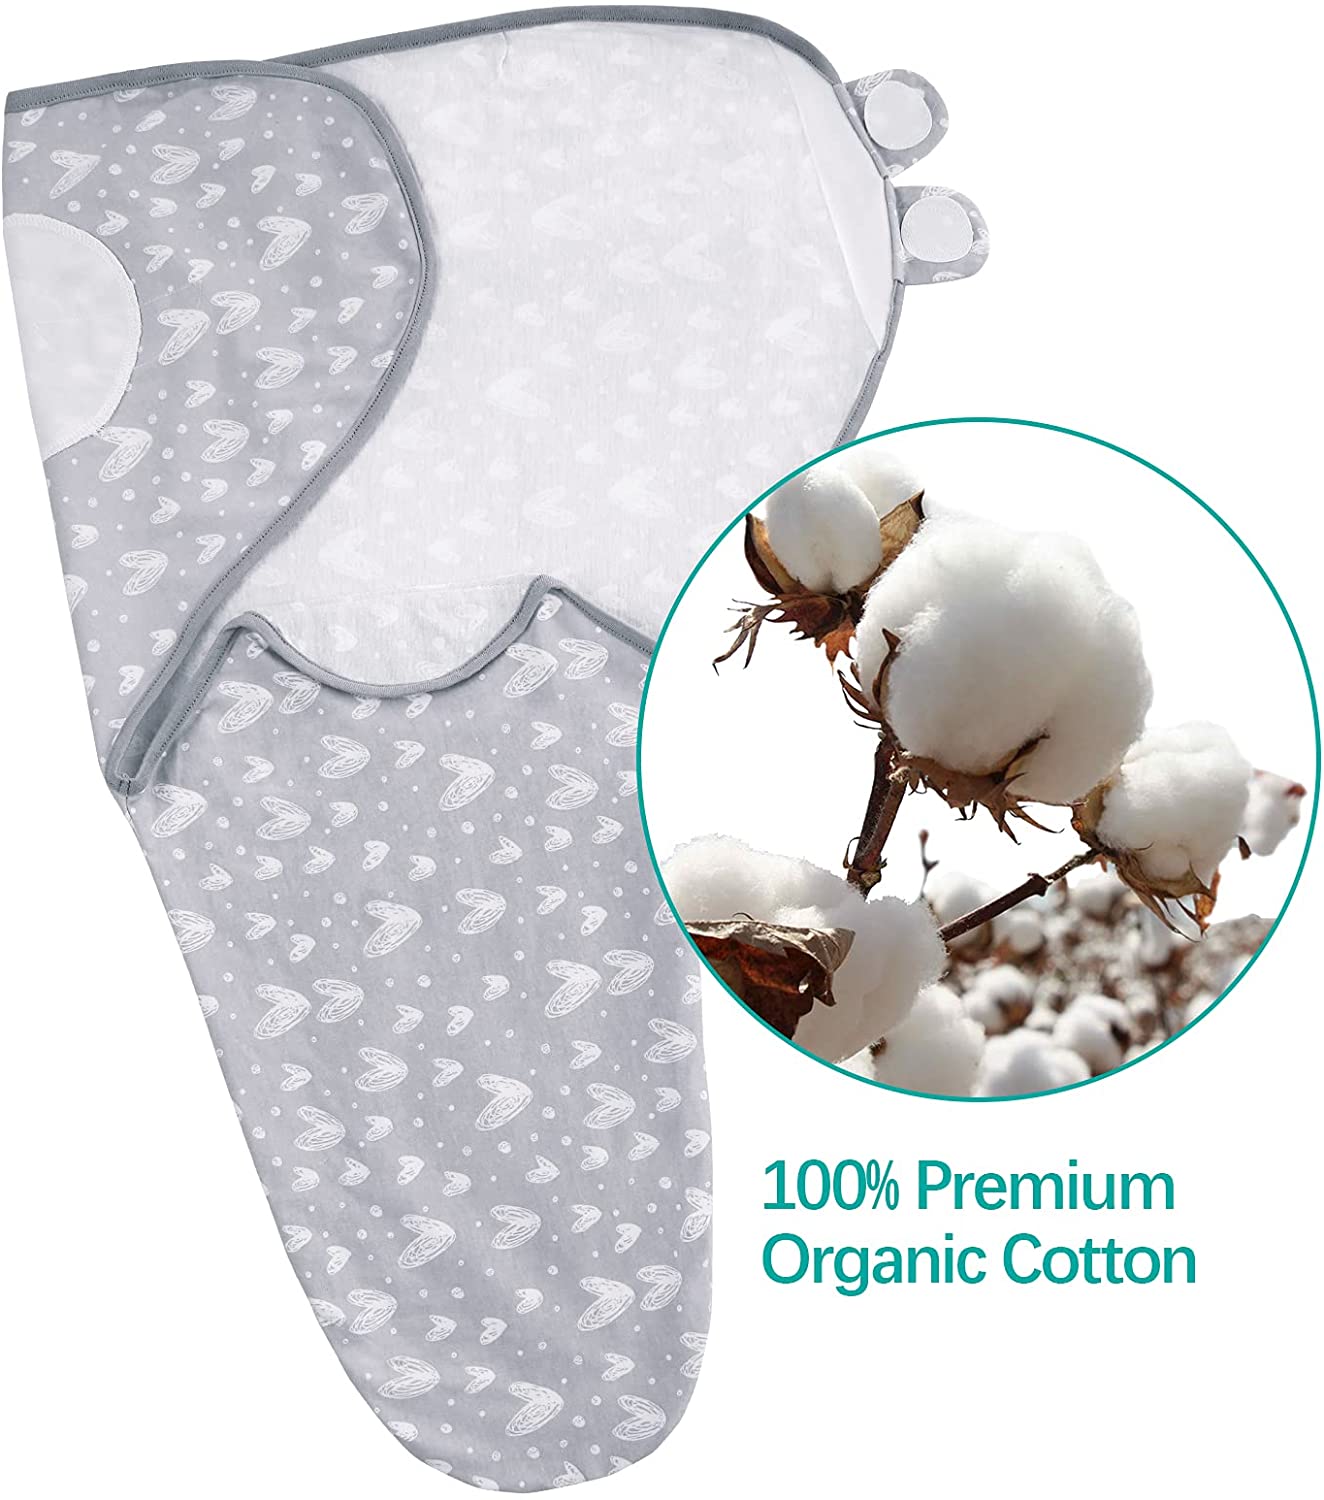 Baby Swaddles - for Newborn 3-6 Months, 2 Pack, 100% Organic Cotton